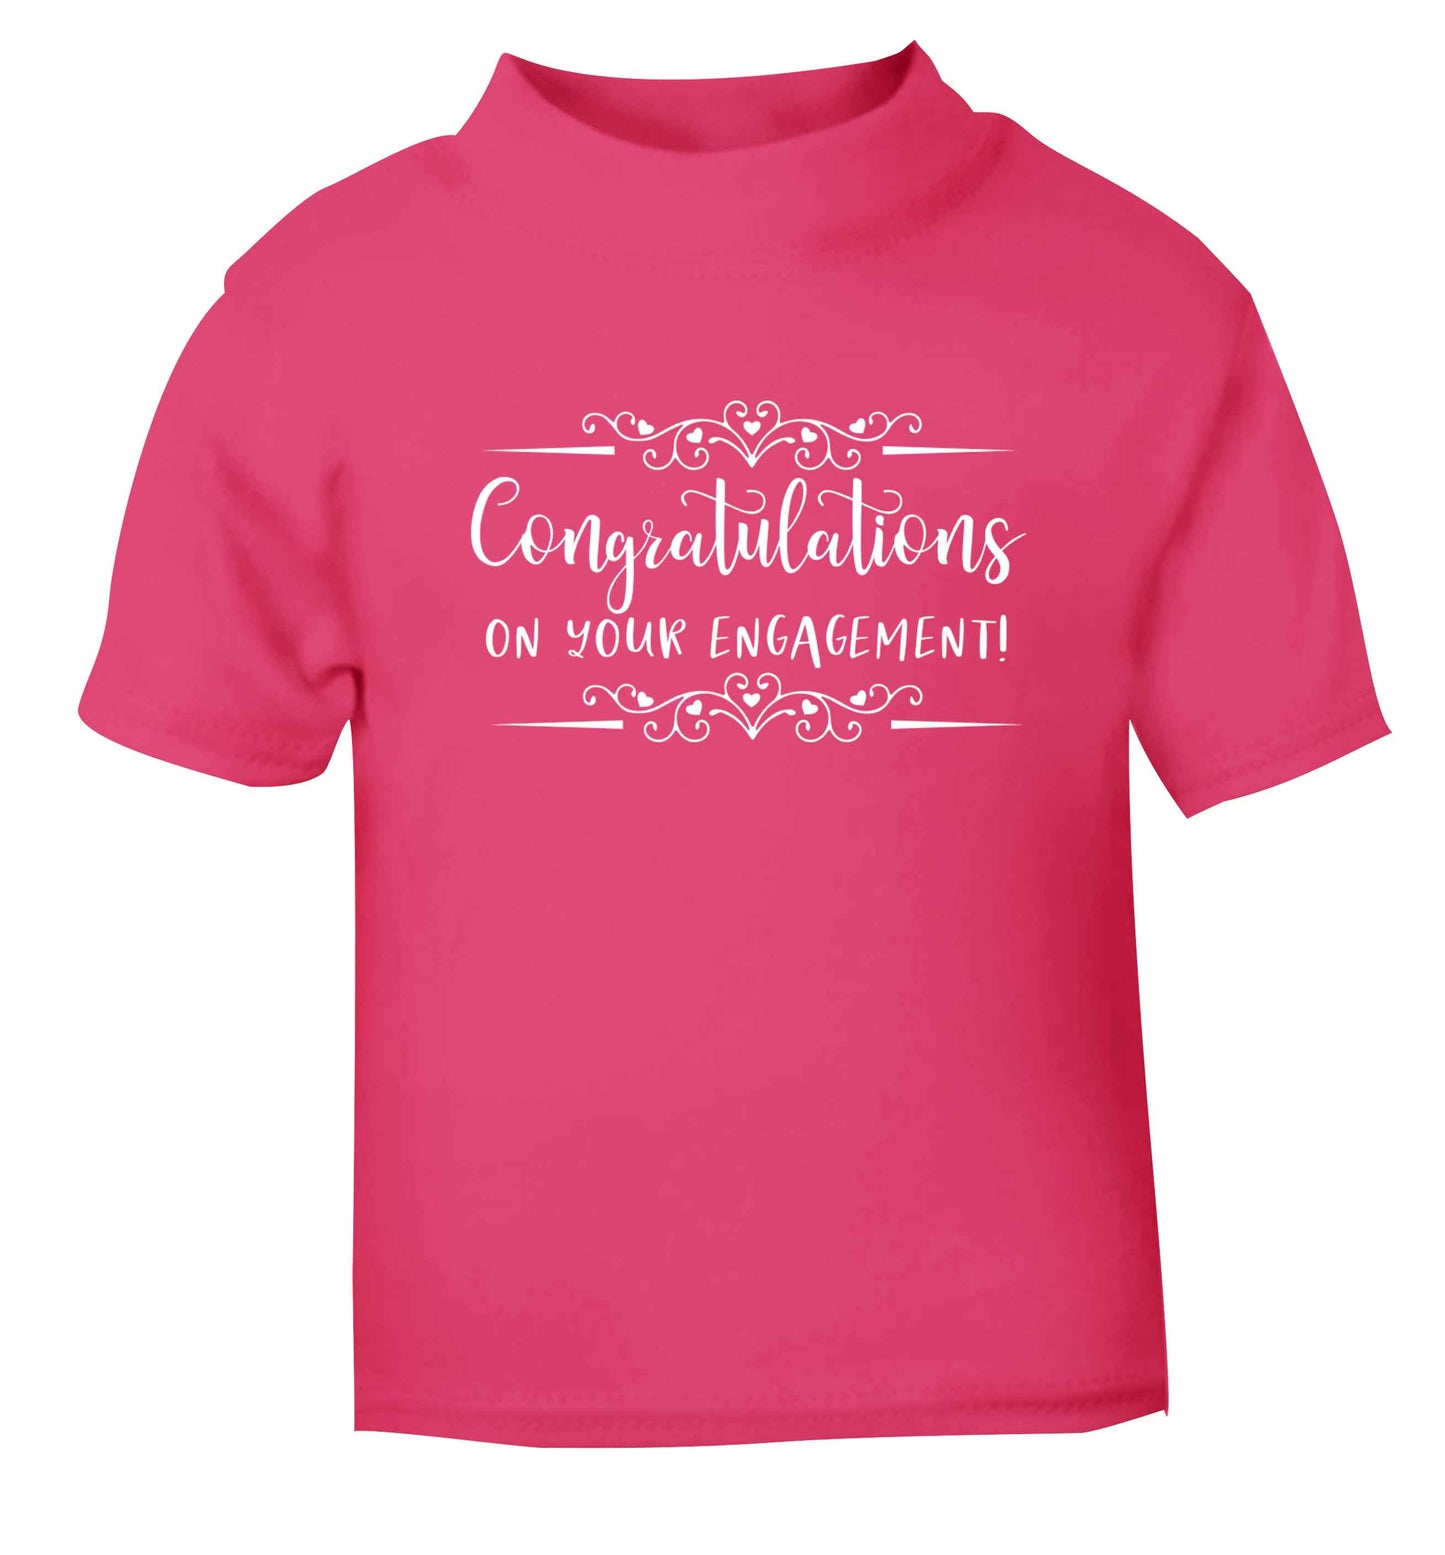 Congratulations on your engagement pink baby toddler Tshirt 2 Years